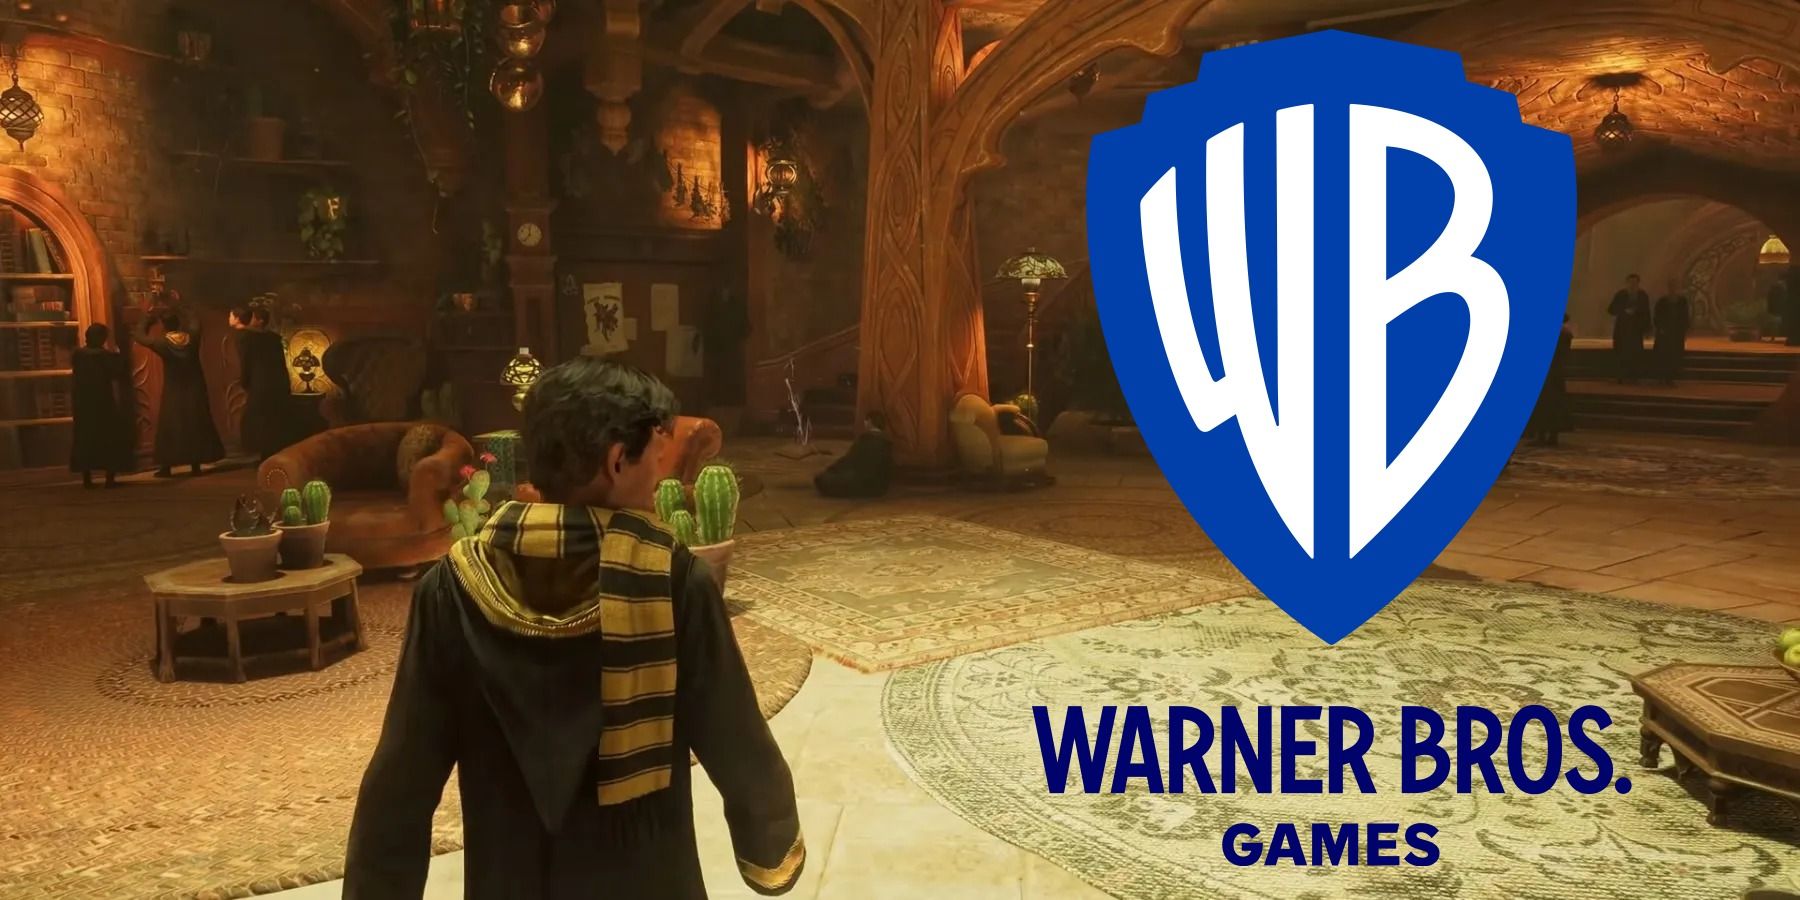 The best Warner Bros games for PC gamers